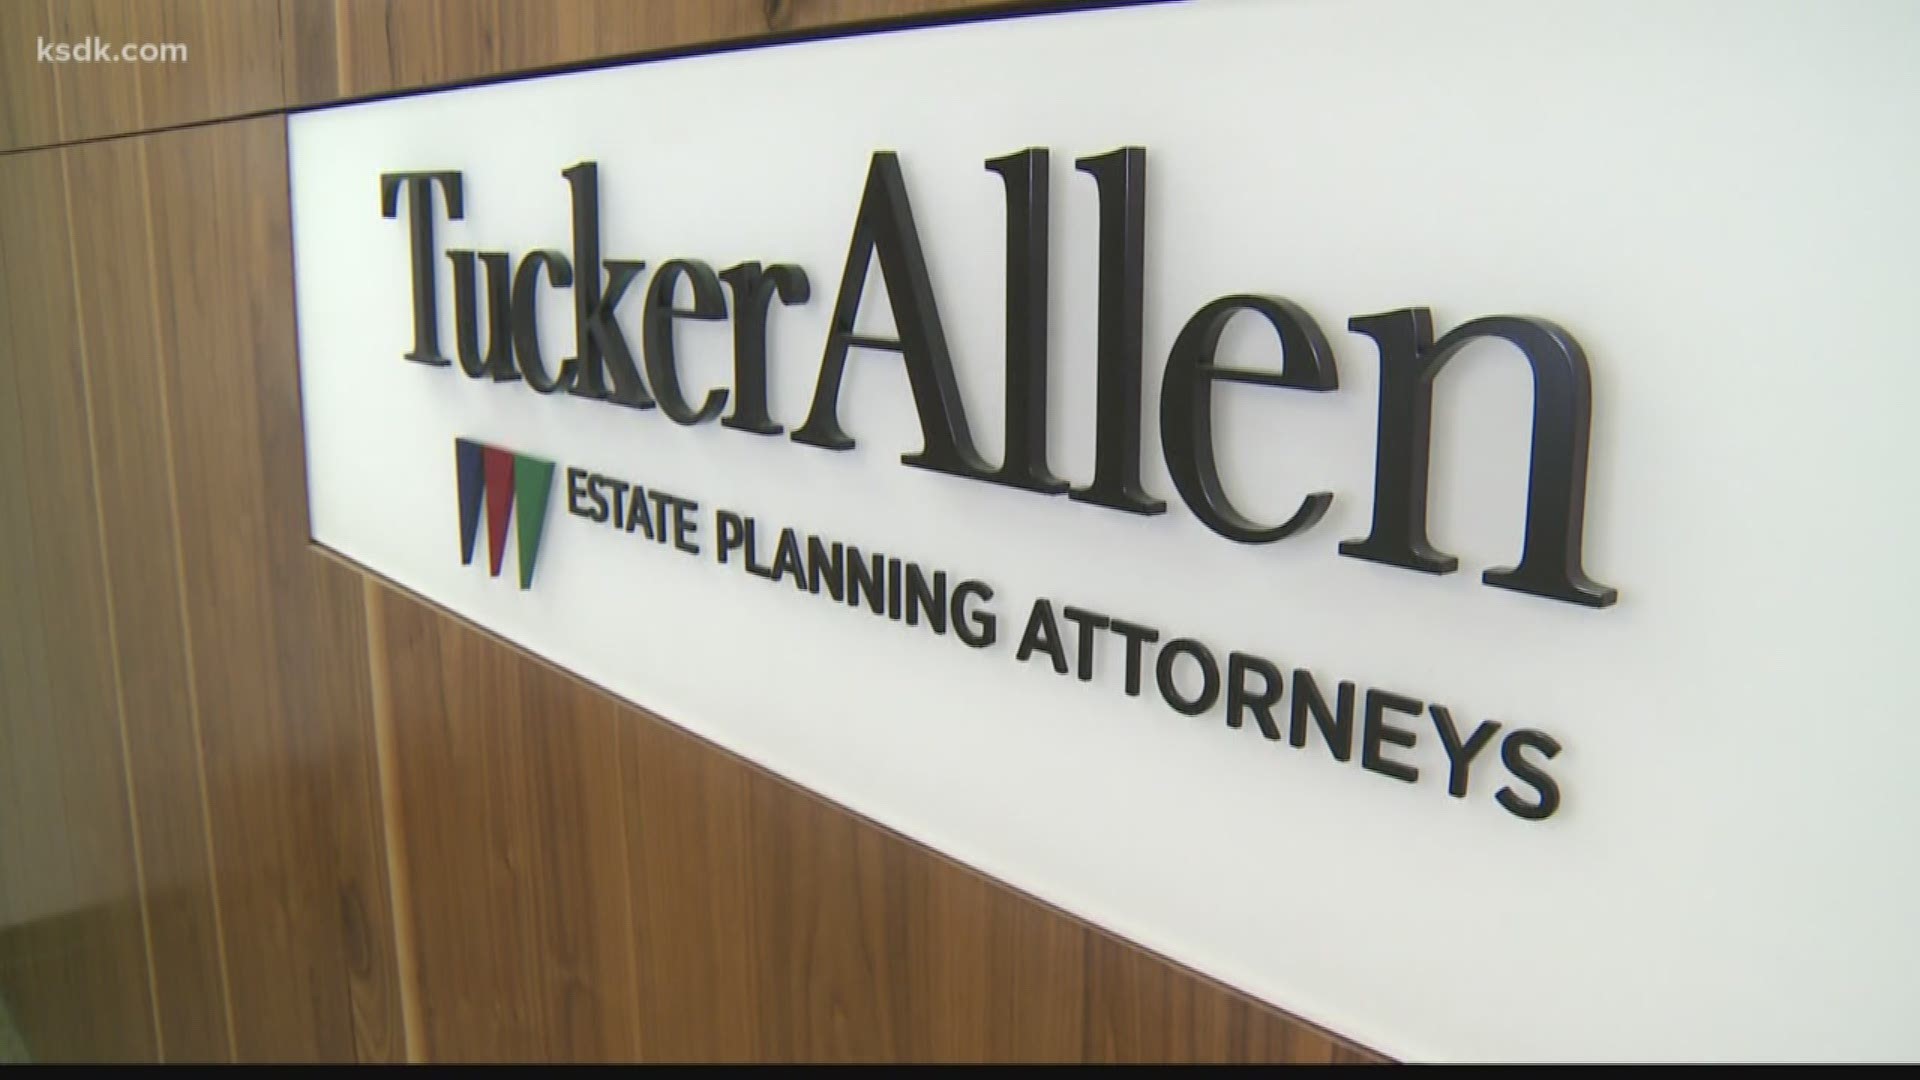 TuckerAllen Estate Planning Attorneys want to help you have a plan in place.